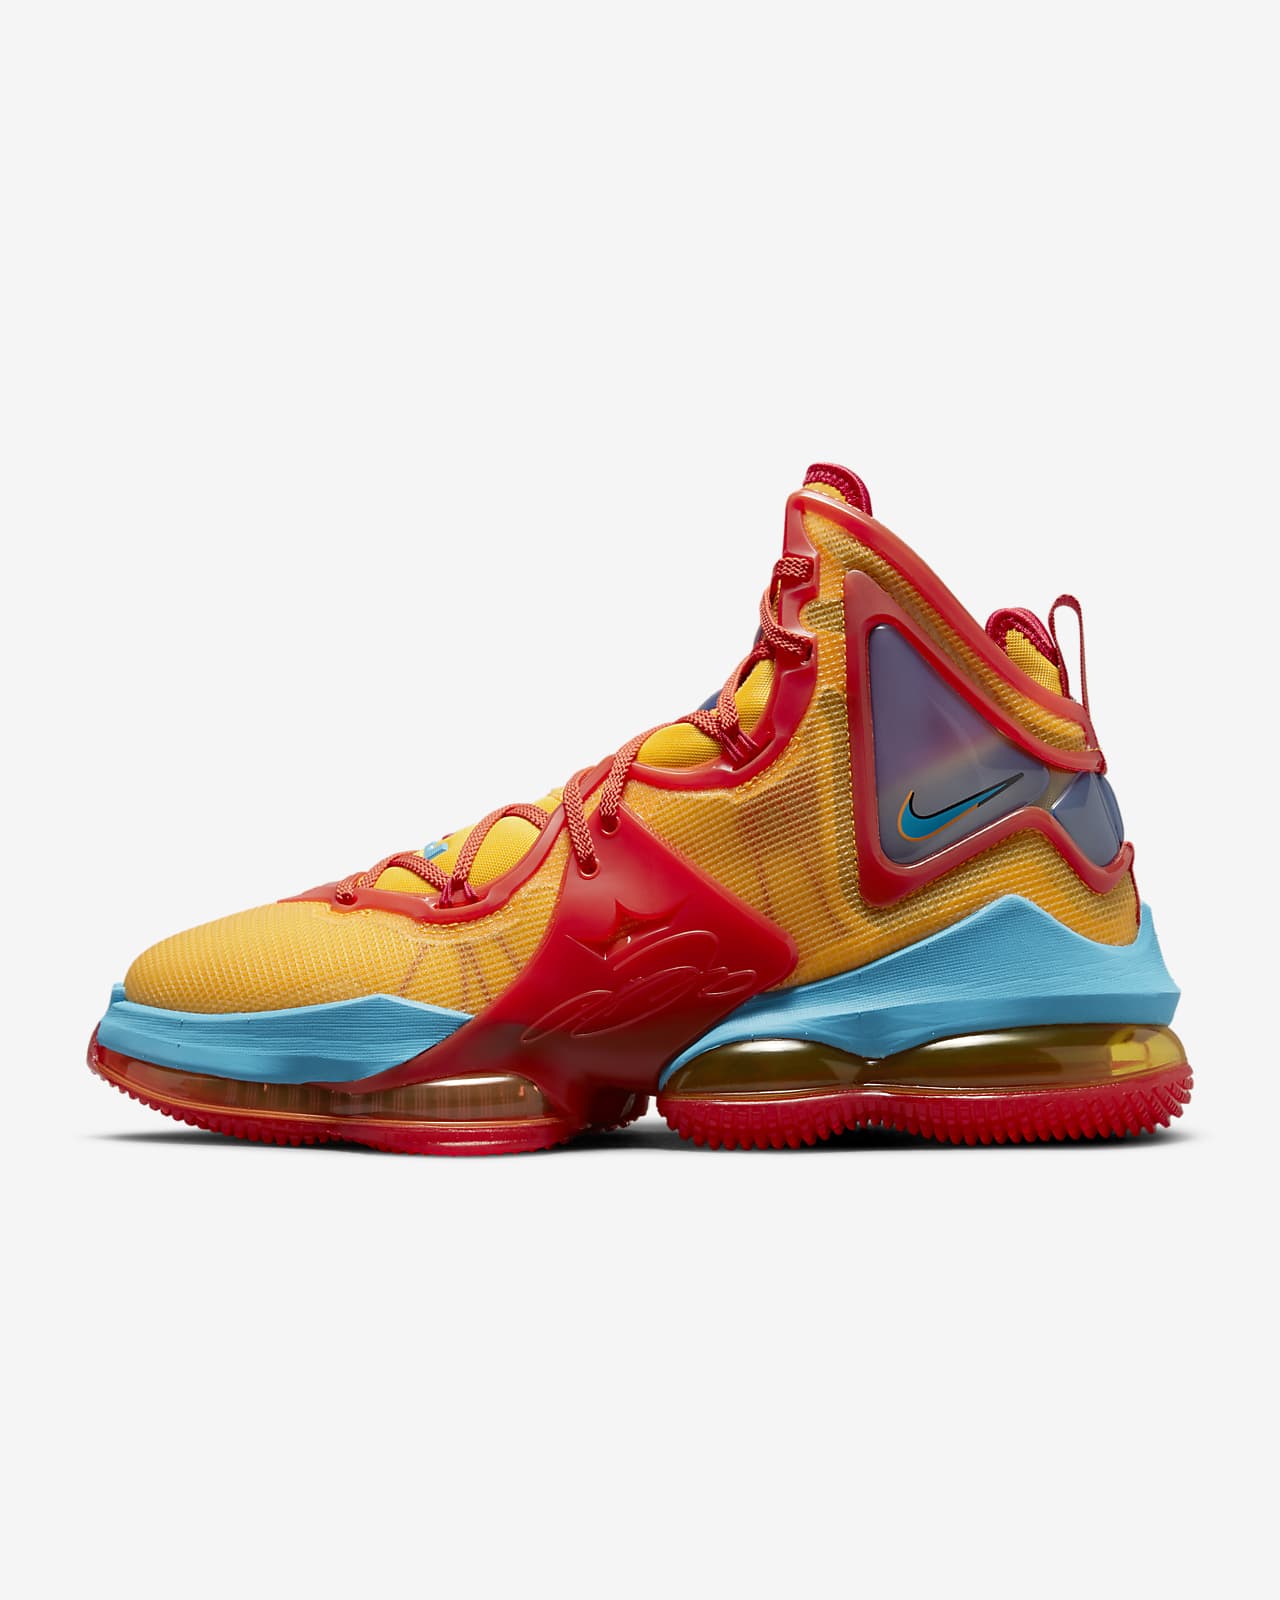 Discover more than 85 lebron nike id shoes super hot